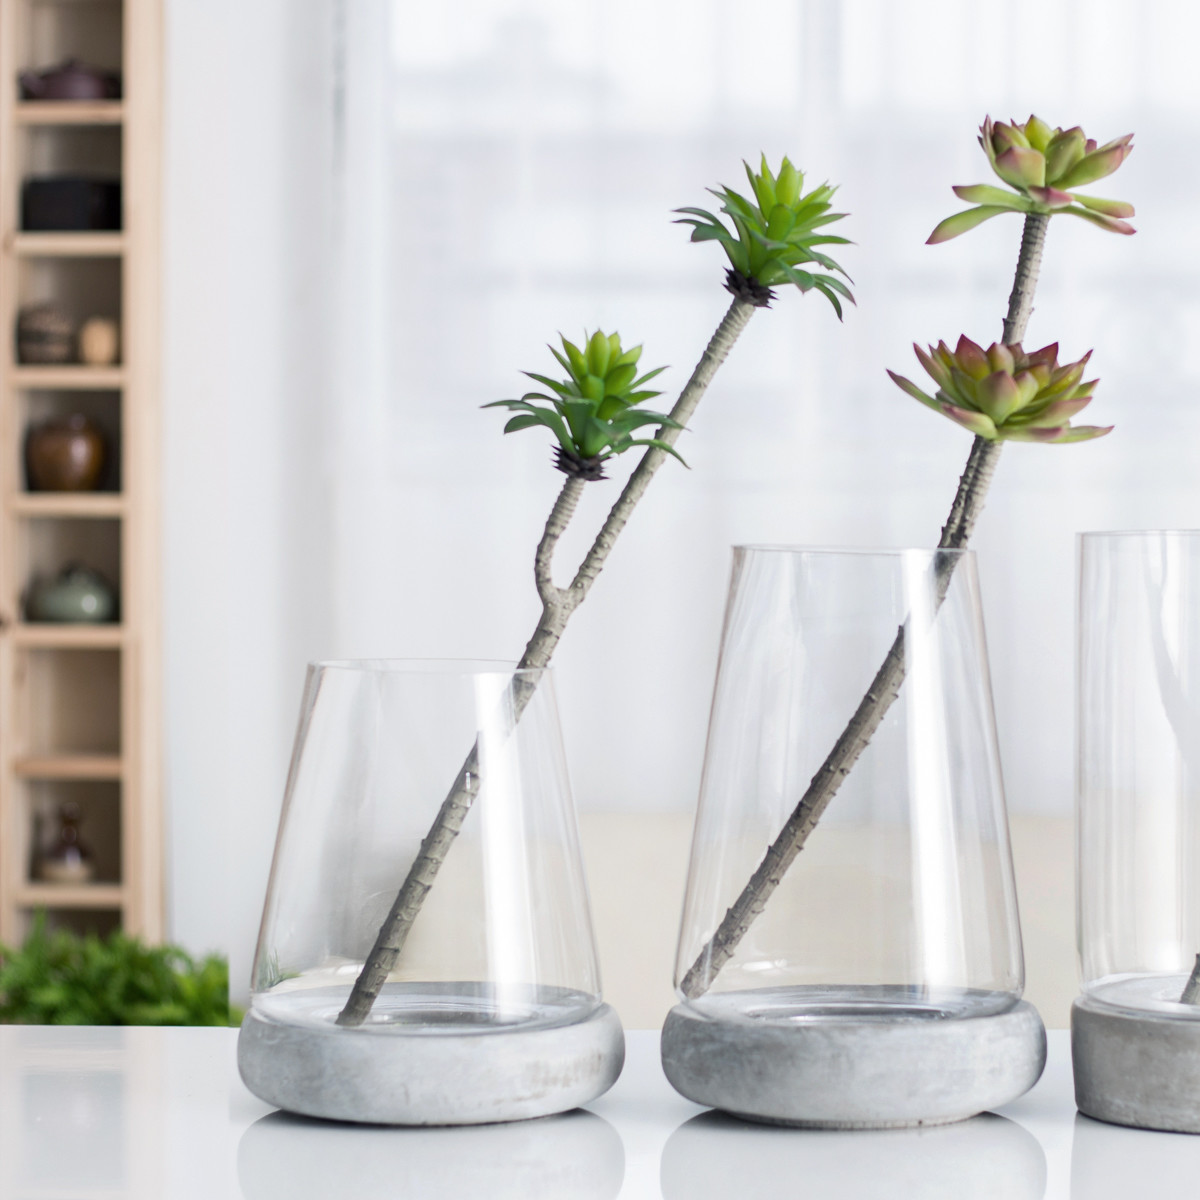 28 Stunning Decorative Glass Vases Large 2024 free download decorative glass vases large of usd 25 42 sicily home cas series nordic minimalist glass vase in sicily home cas series nordic minimalist glass vase cement underpinning home decoration flowe